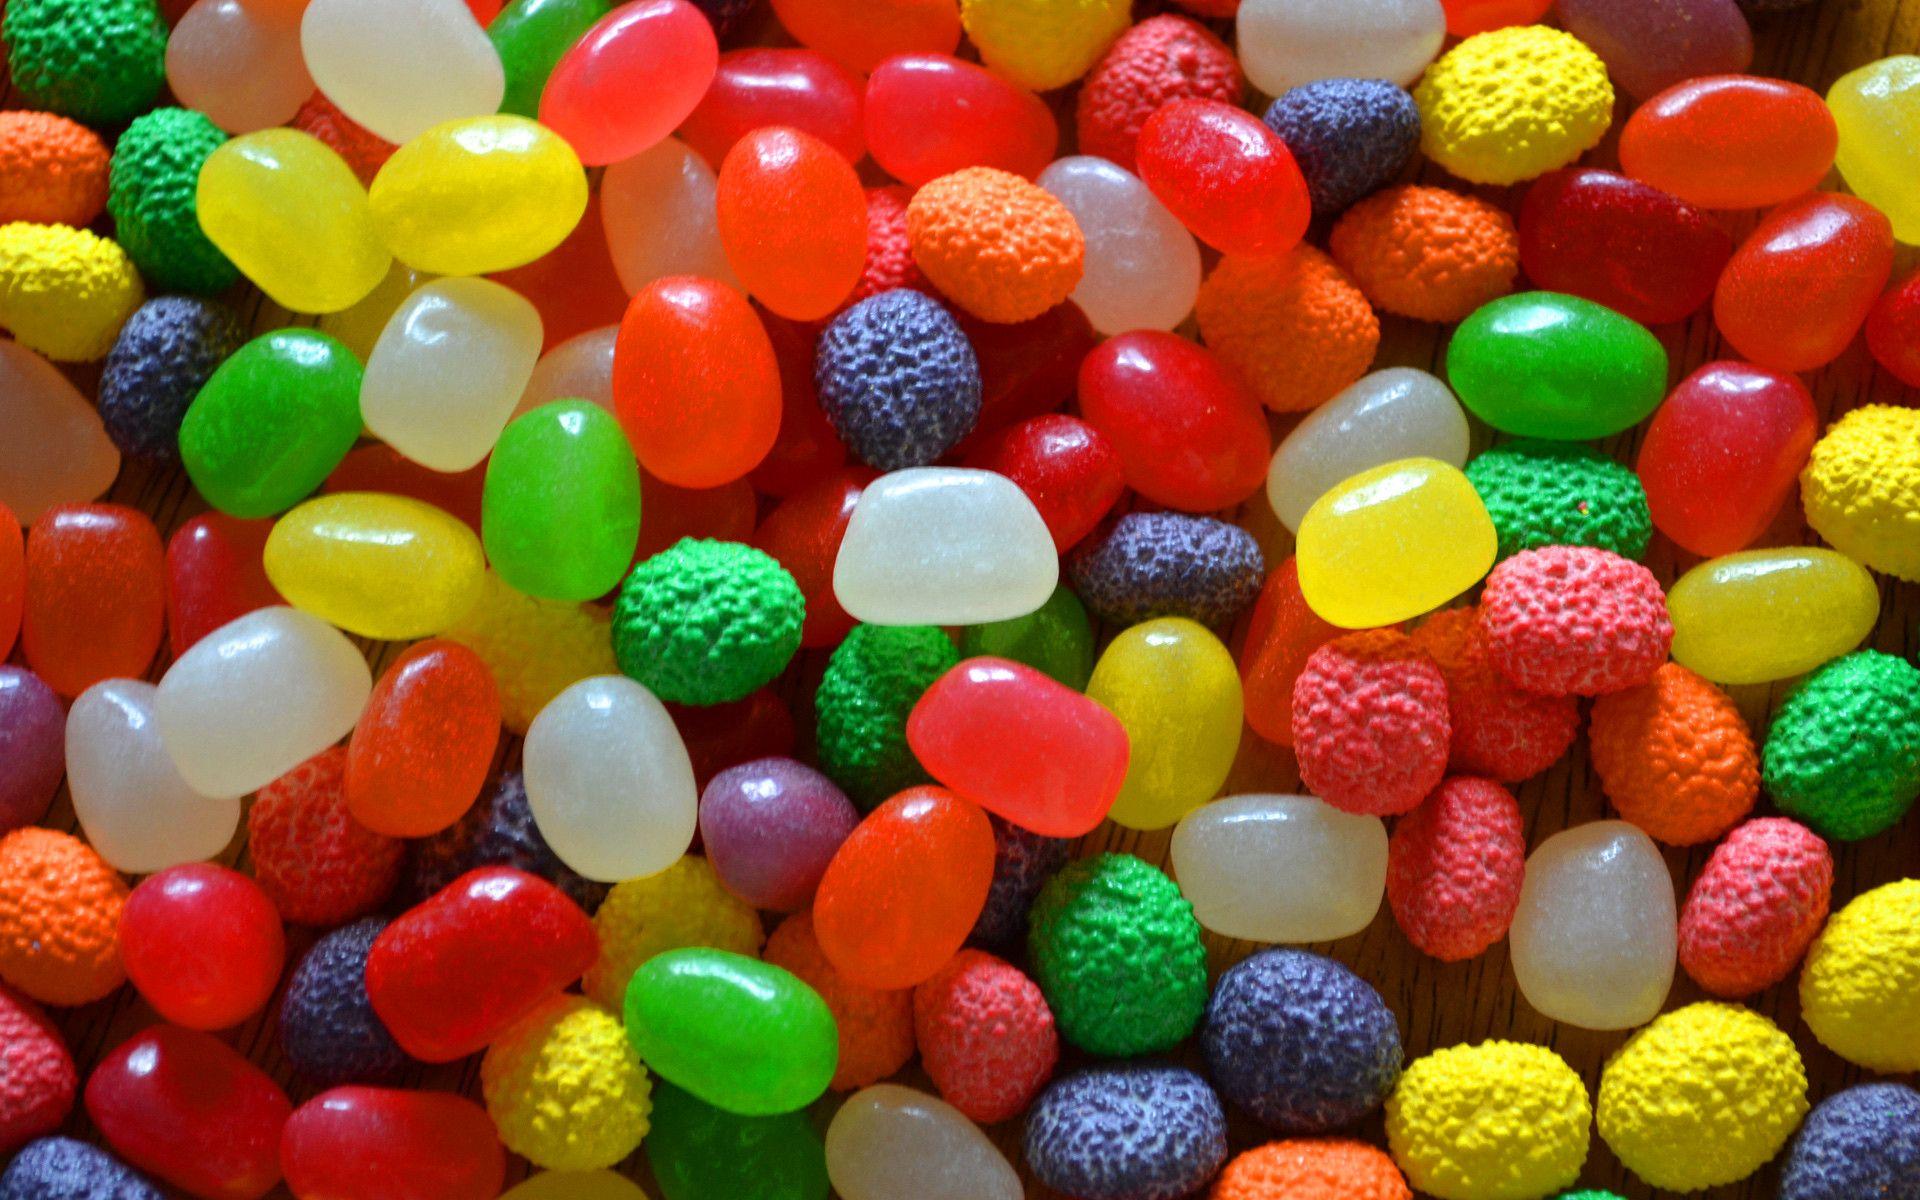 gorgerous Jelly Bean Wallpaper 1920x1200. Beans image, Jelly beans, Free picture